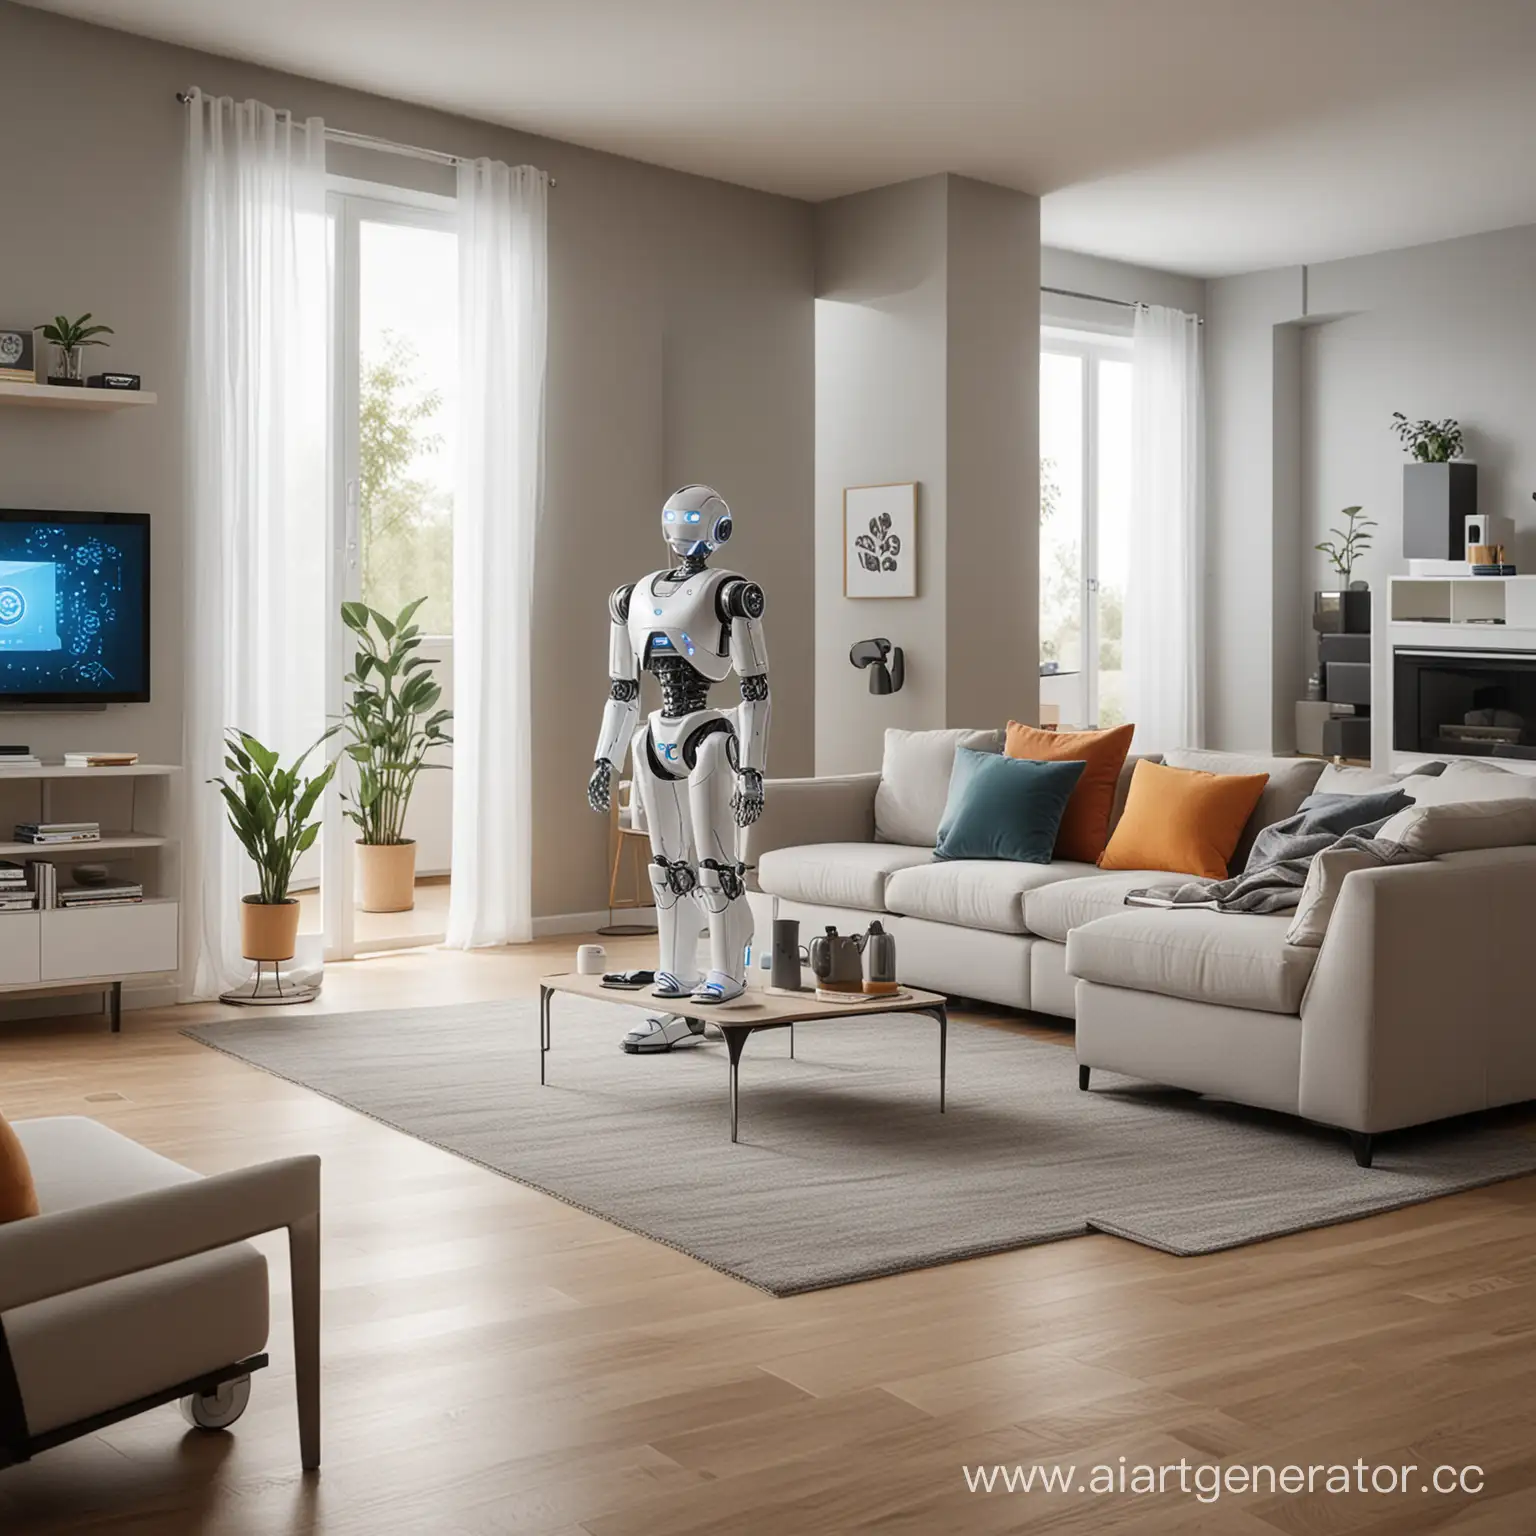 Futuristic-Robot-Household-Assistant-in-Action